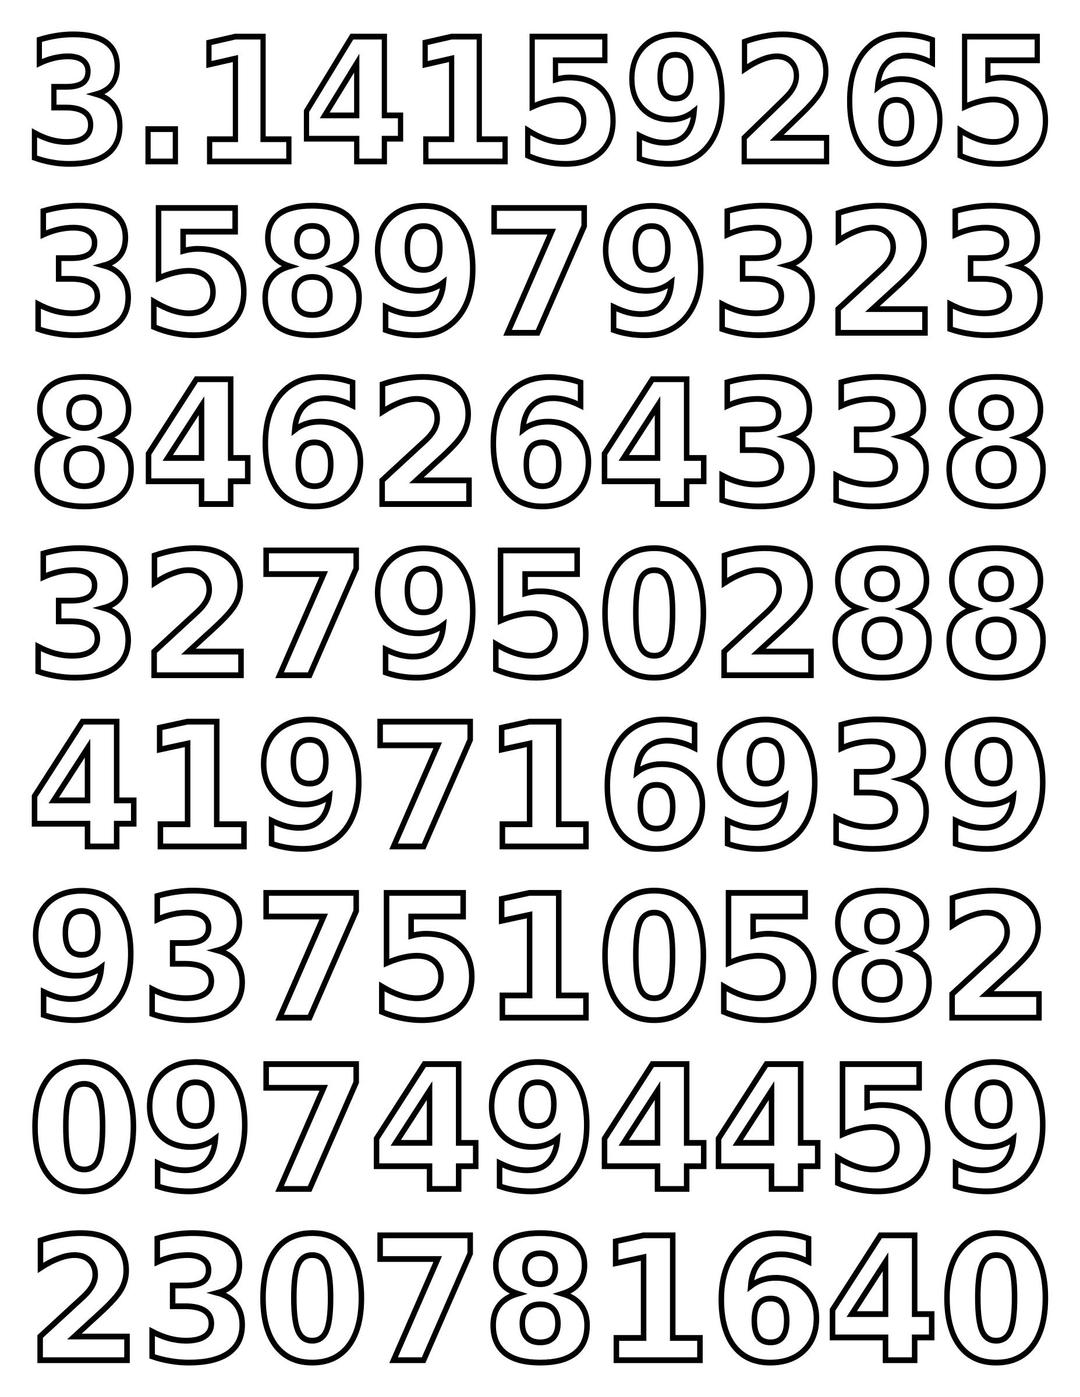 Coloring page - pi day digits of pi png transparent